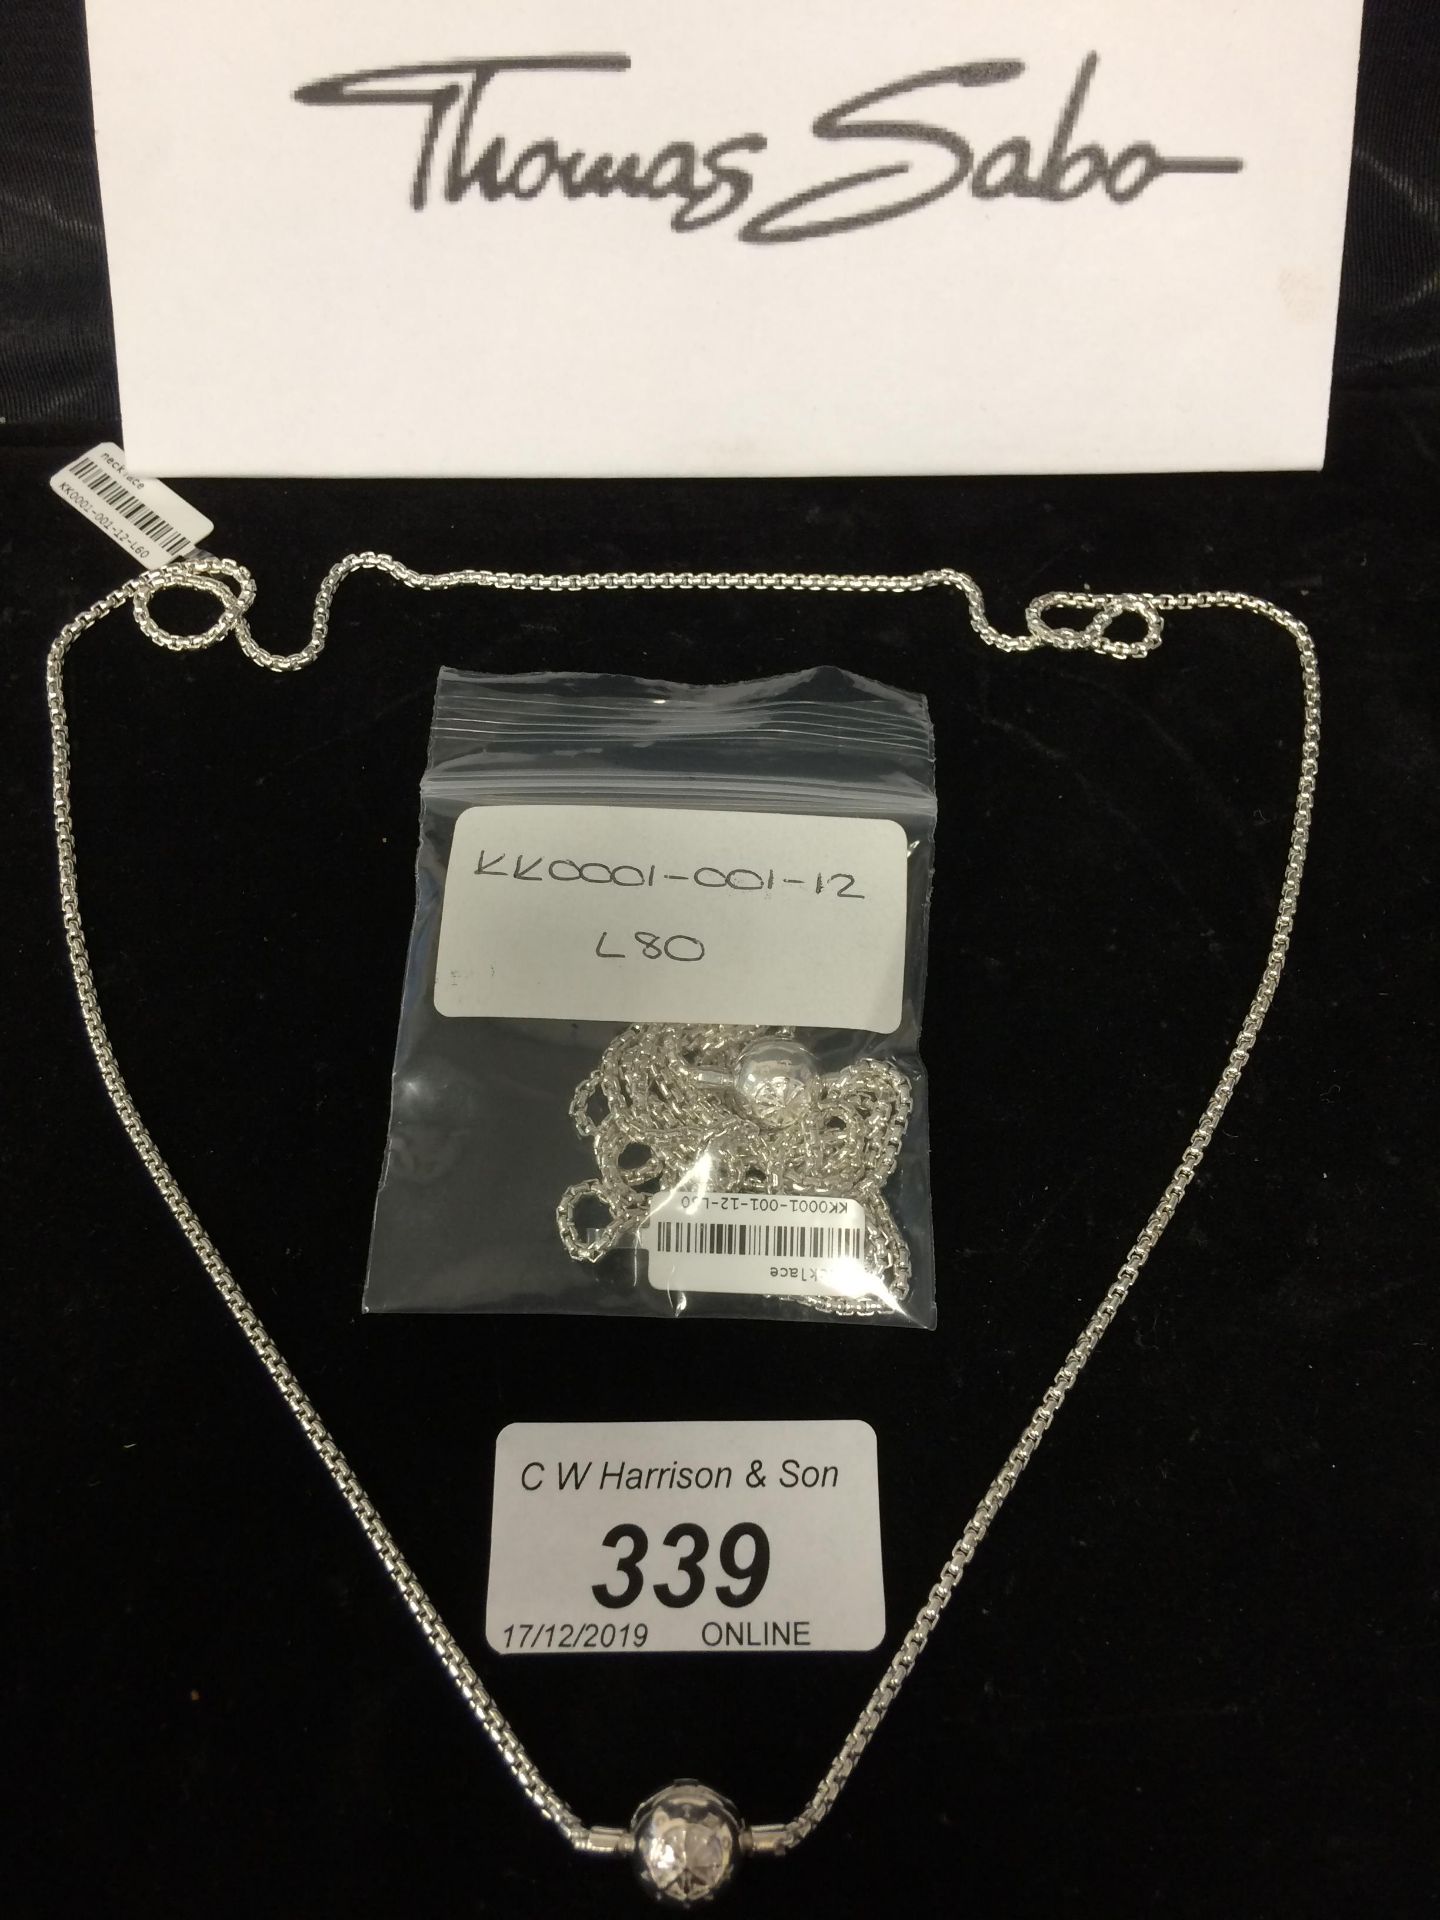 2 x Thomas Sabo 925 karma bead chains in blackened silver with ball lock (60cm & 80cm) RRP £84-£98